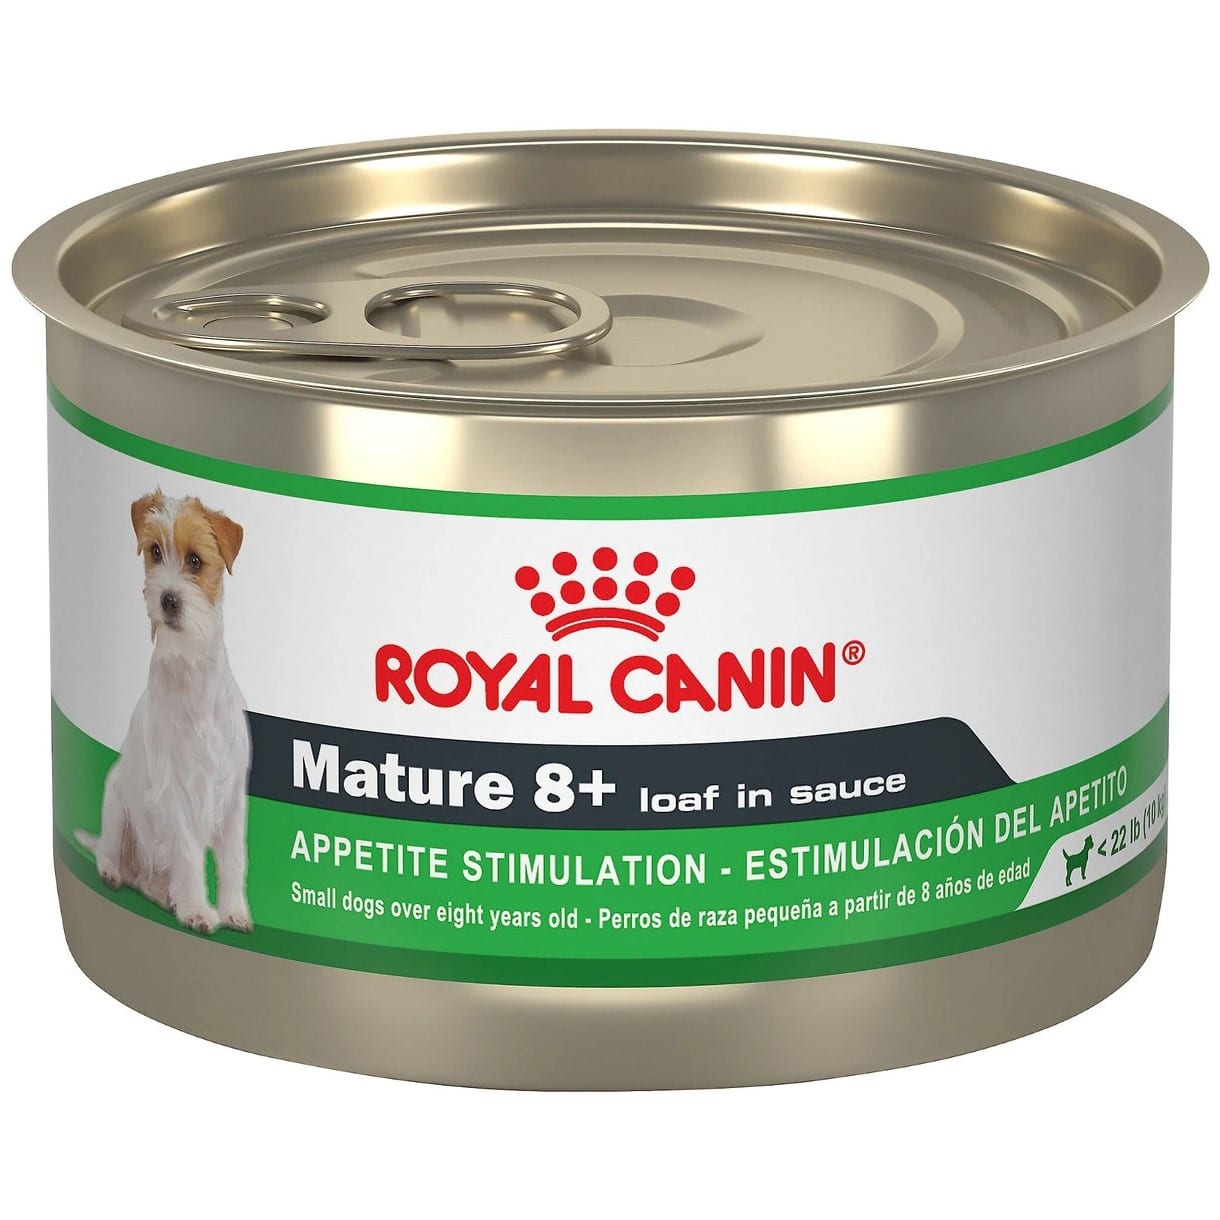 Royal Canin Mature 8+ Canned Dog Food